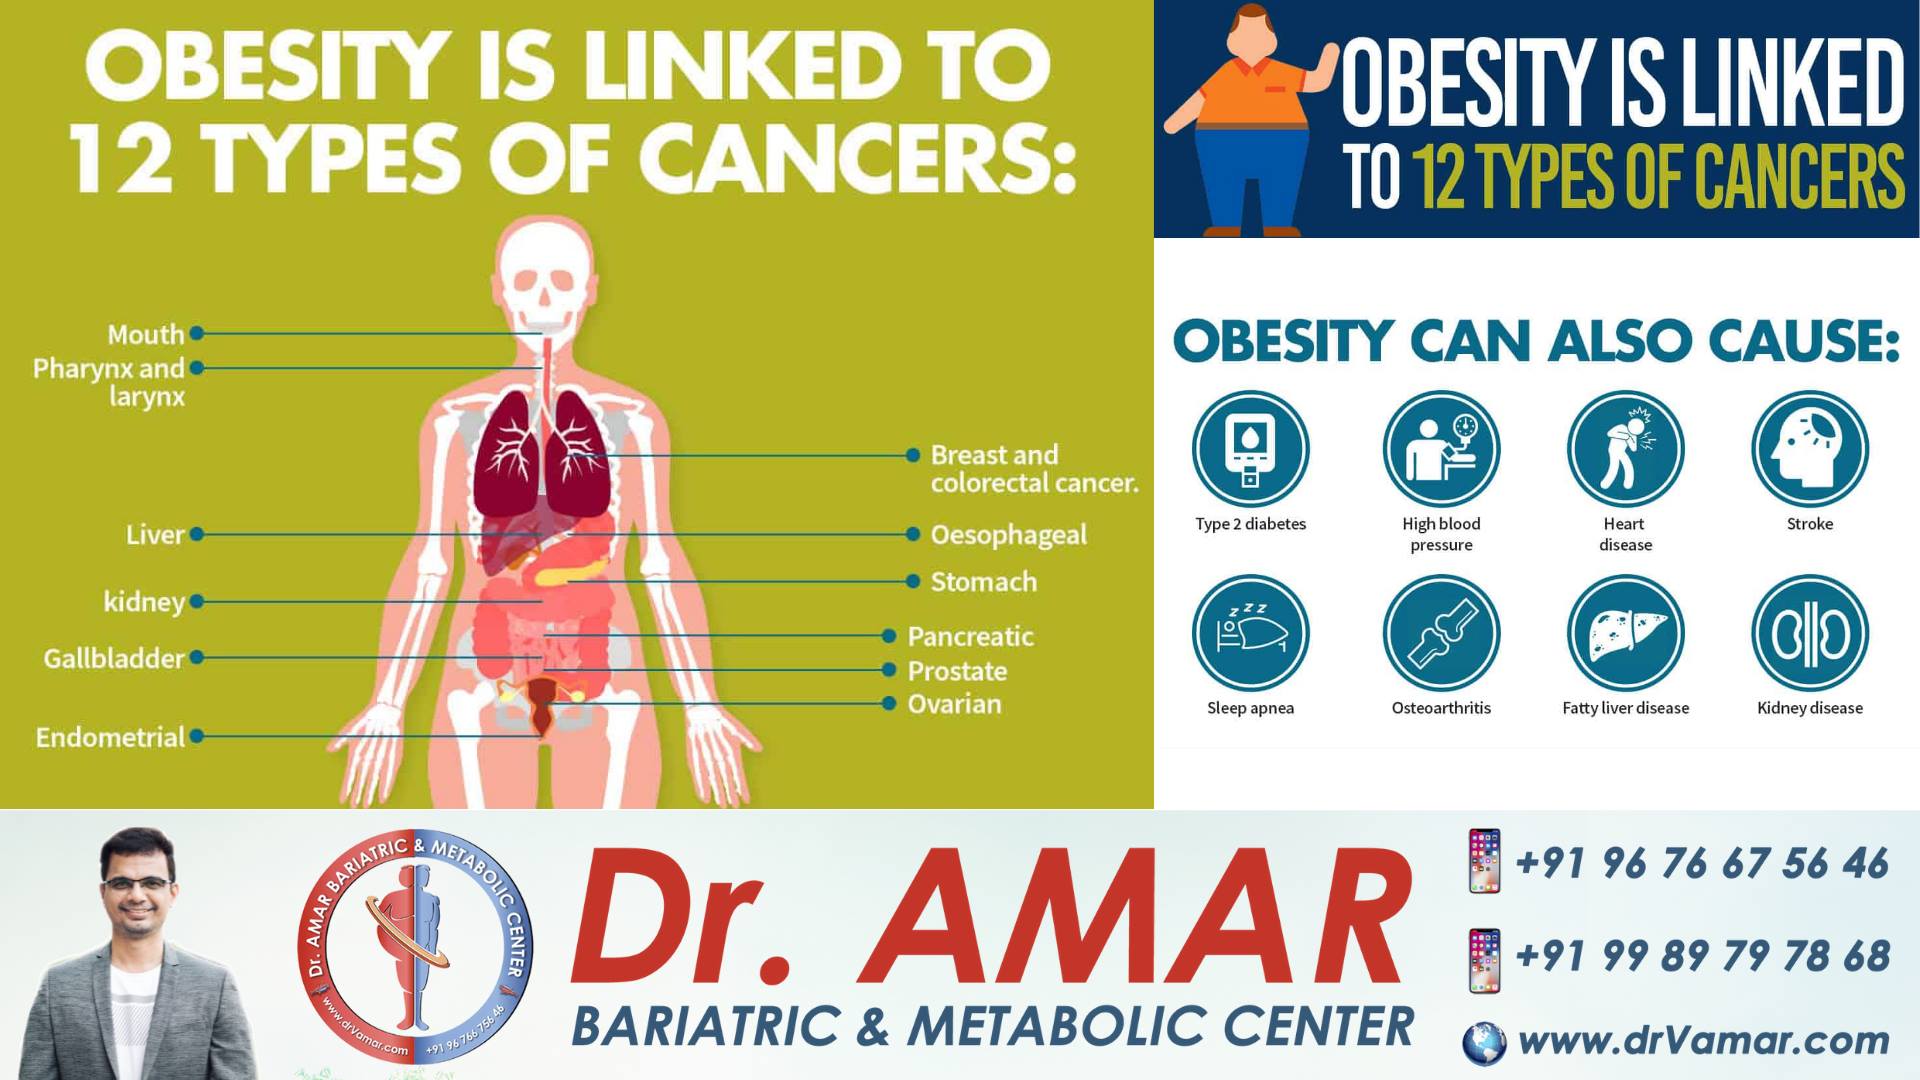 Obesity is linked to 12 different types of cancers